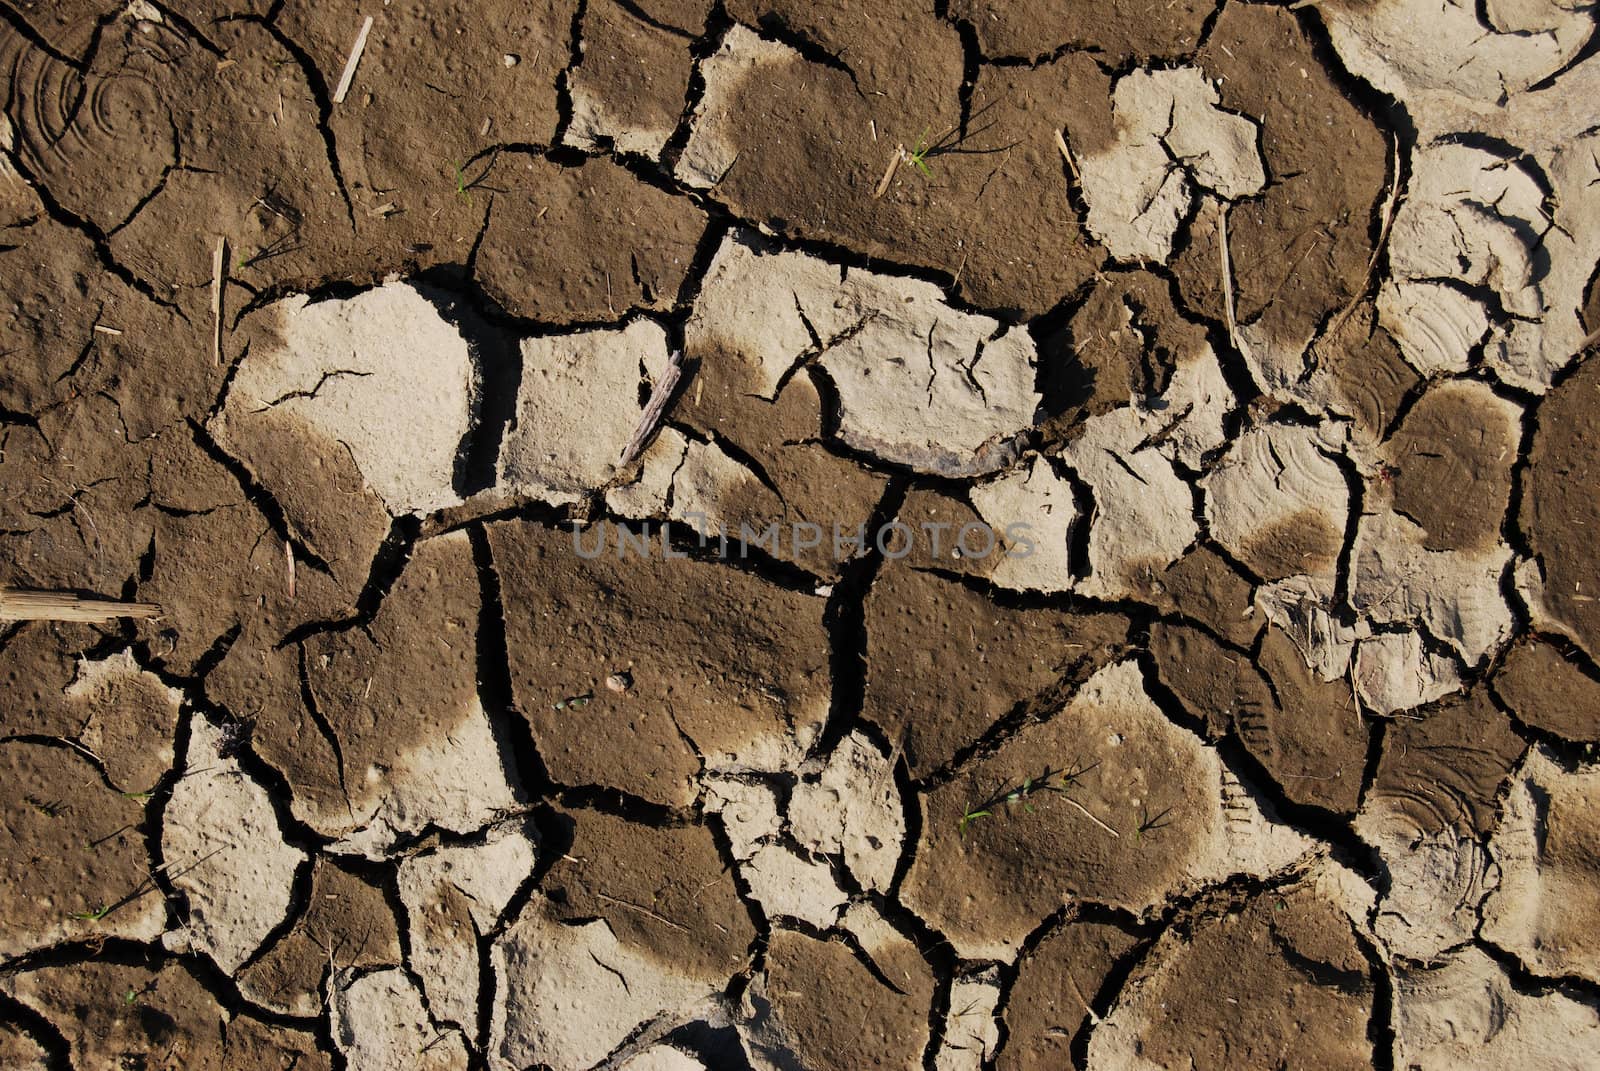 closeup of a dry and cracked patch of earth